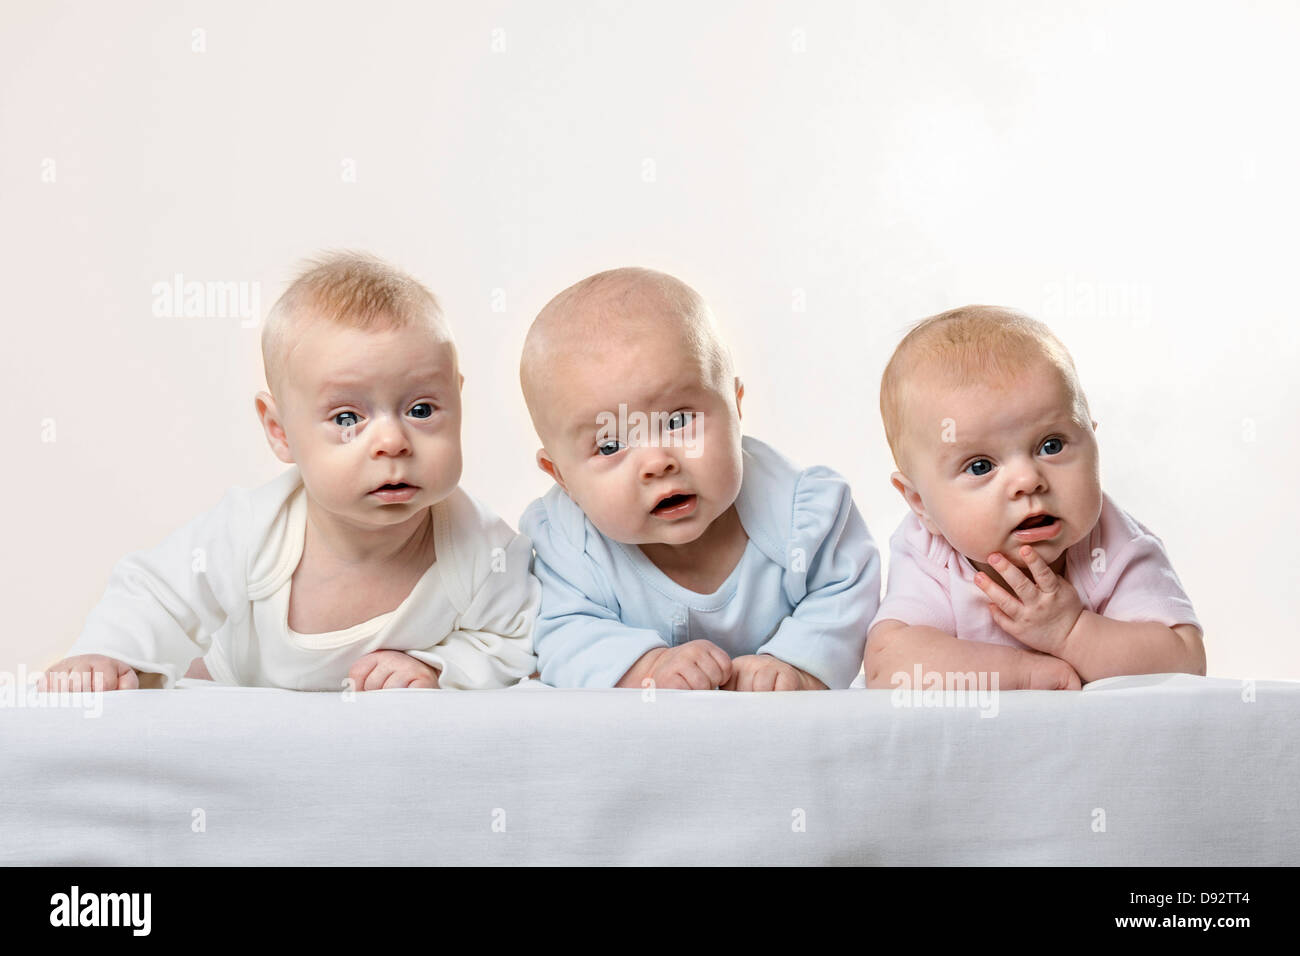 Three babies in a row pulling funny faces Stock Photo